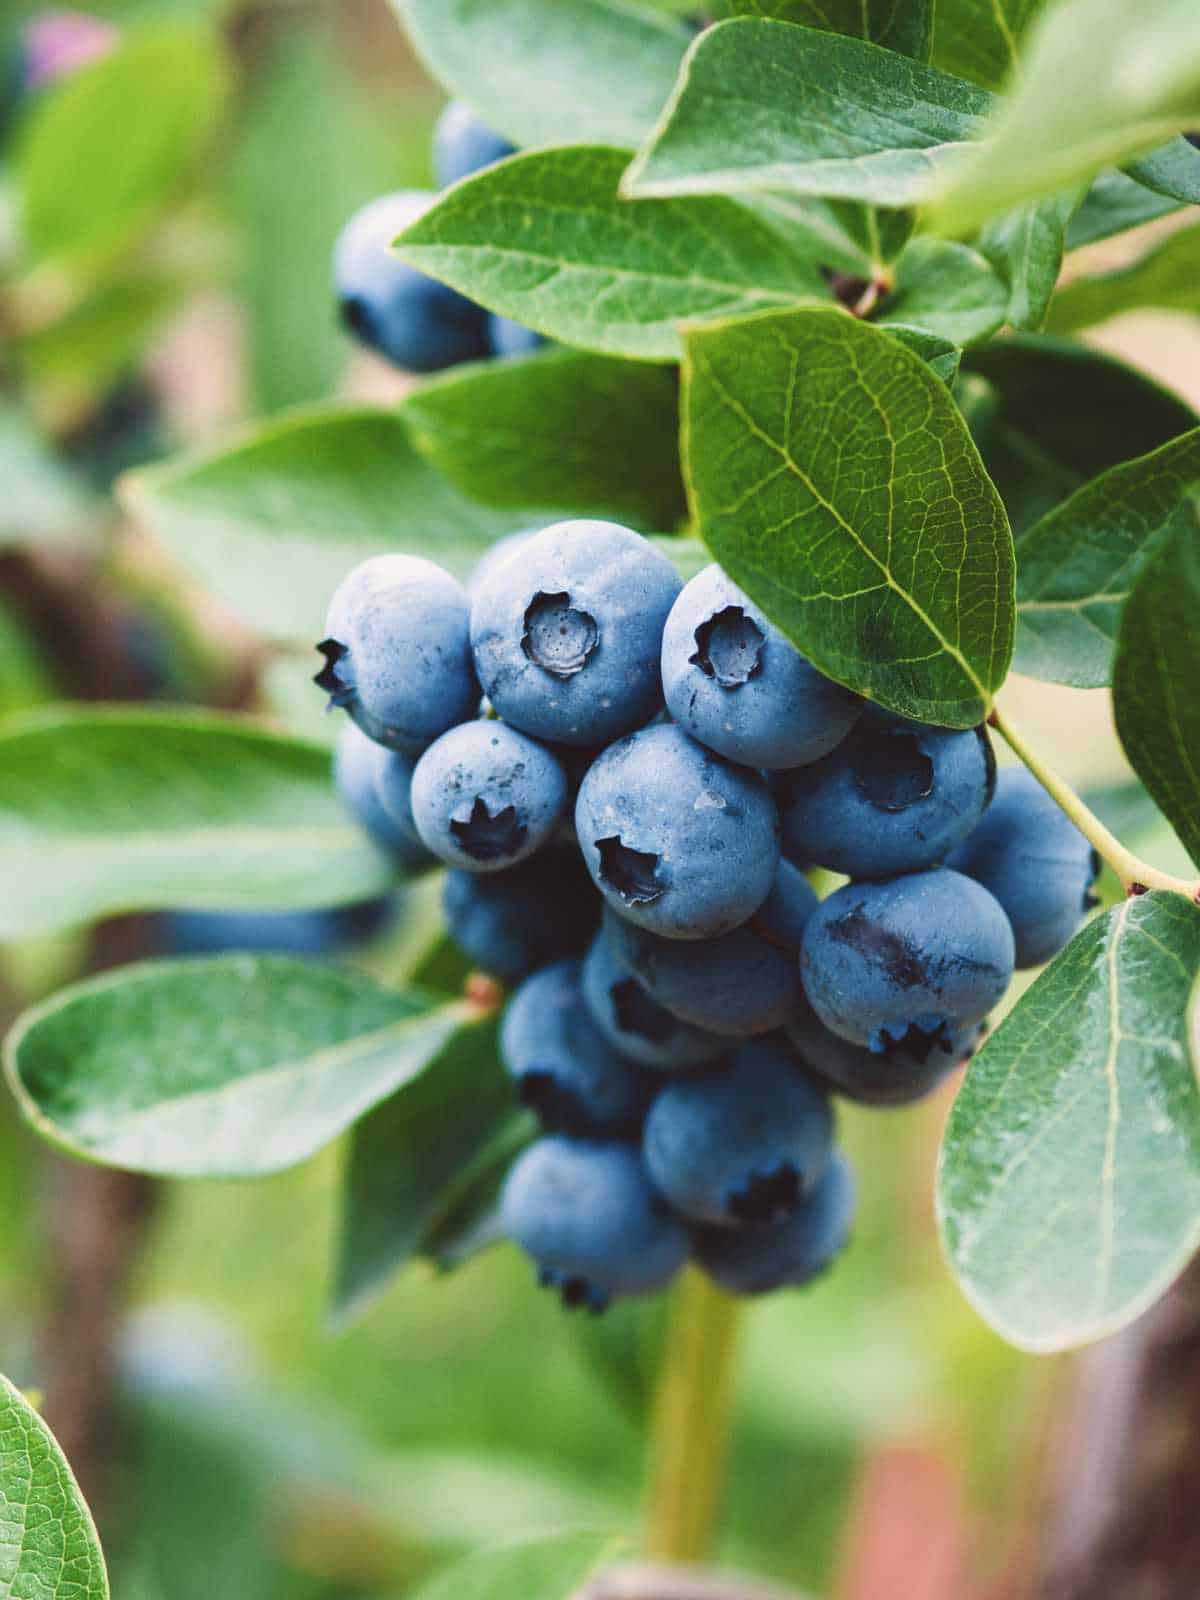 How to Grow and Care for Blueberry Bushes